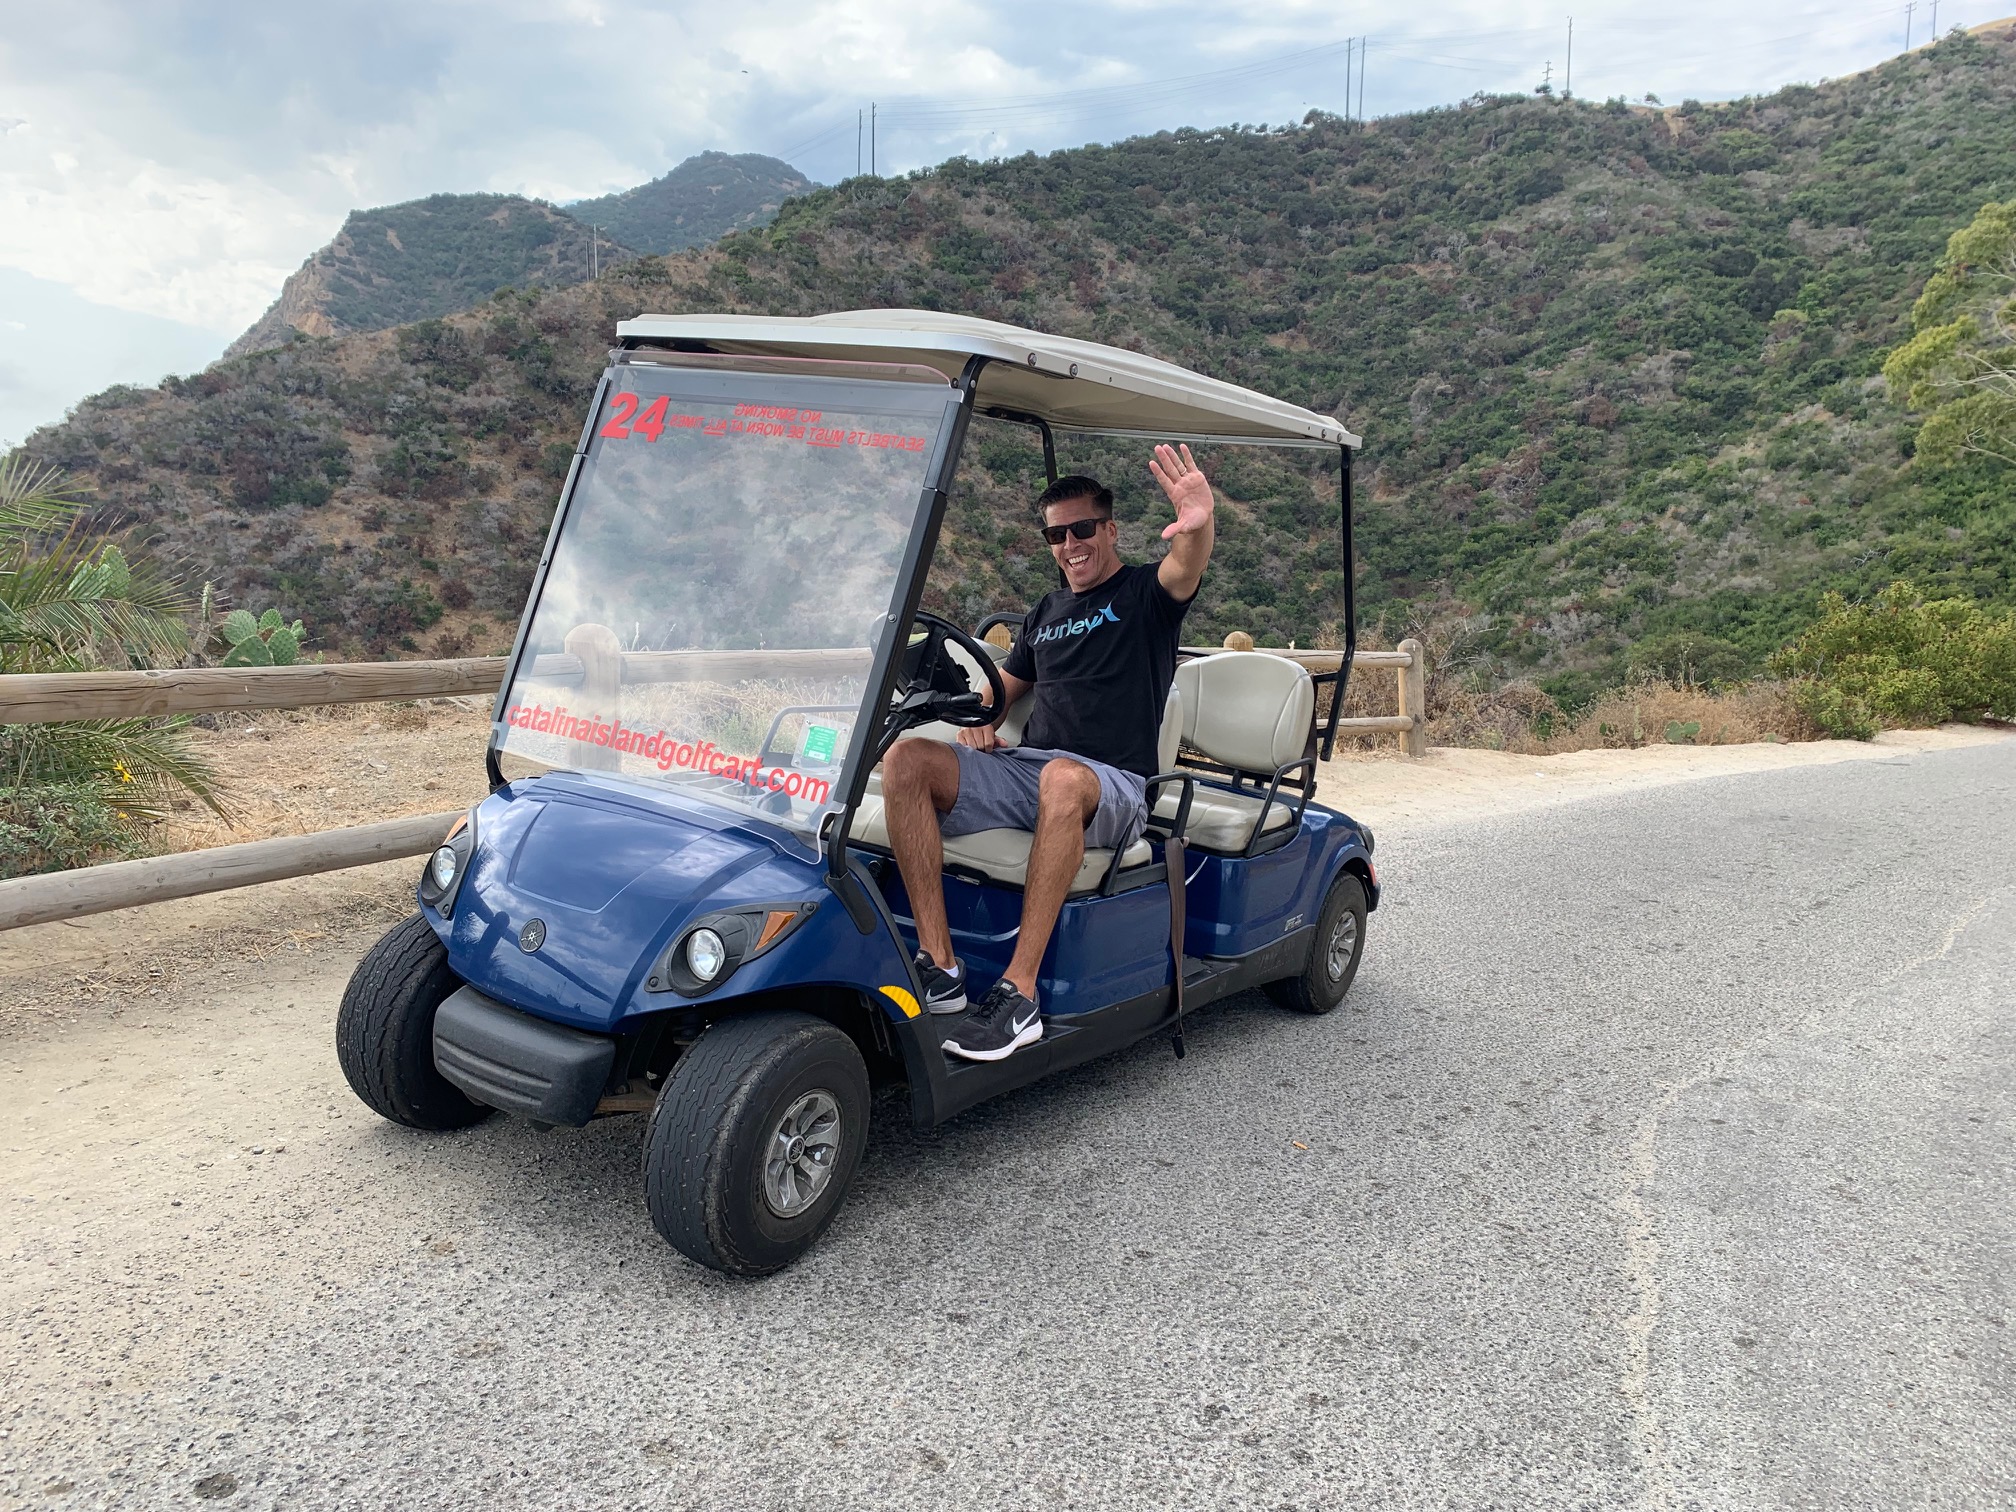 Man waving from a golf cart in Catalina Island